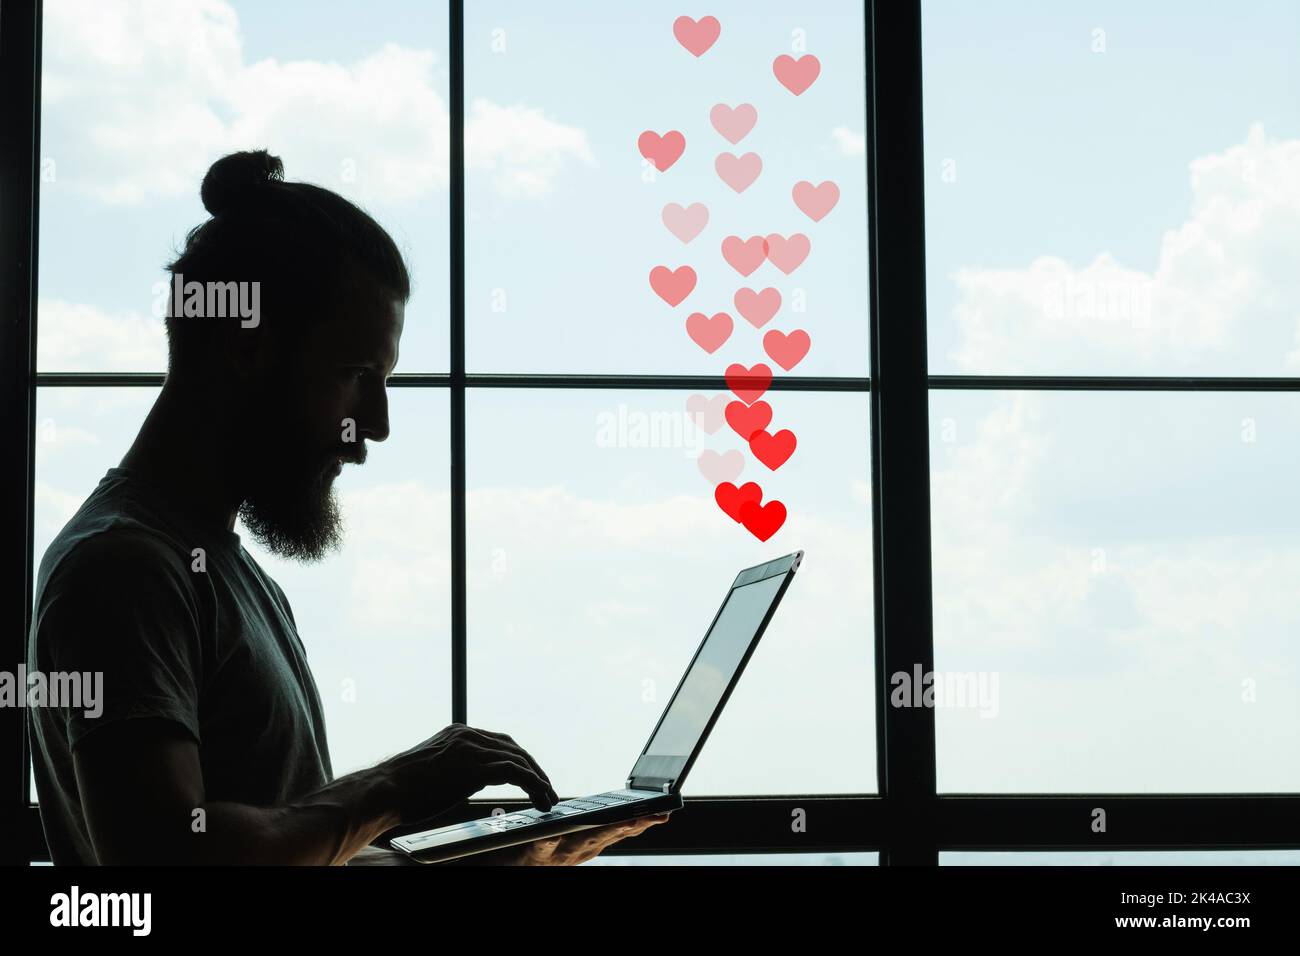 Travel blog. Positive feedback. Freelancer lifestyle. Social media. Side view silhouette of popular male hipster blogger writing content on laptop on Stock Photo